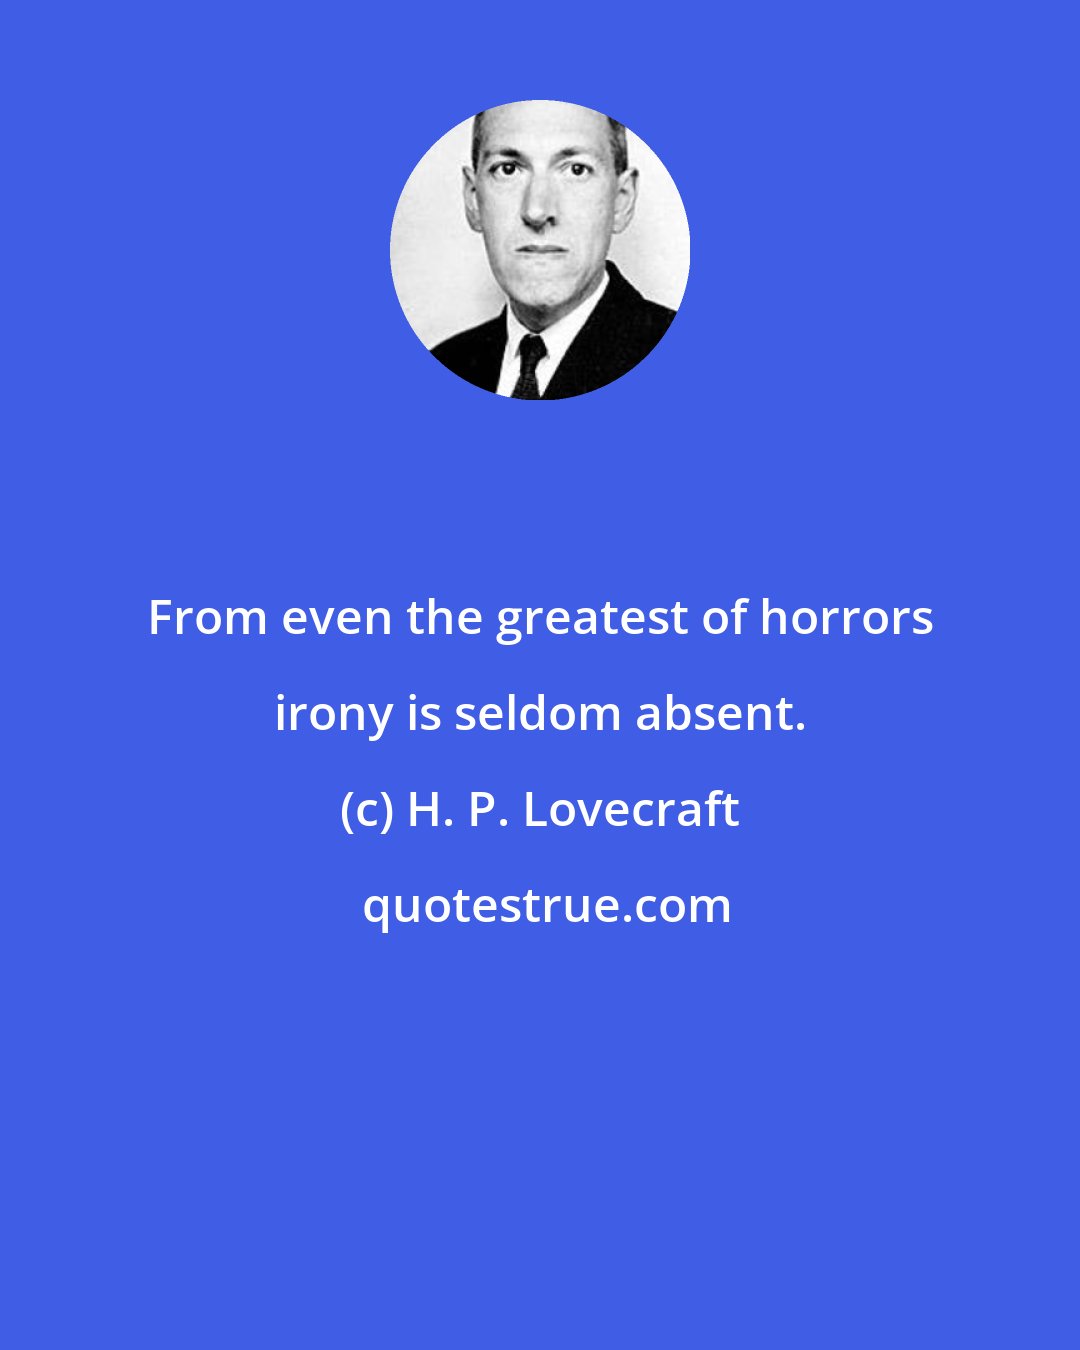 H. P. Lovecraft: From even the greatest of horrors irony is seldom absent.